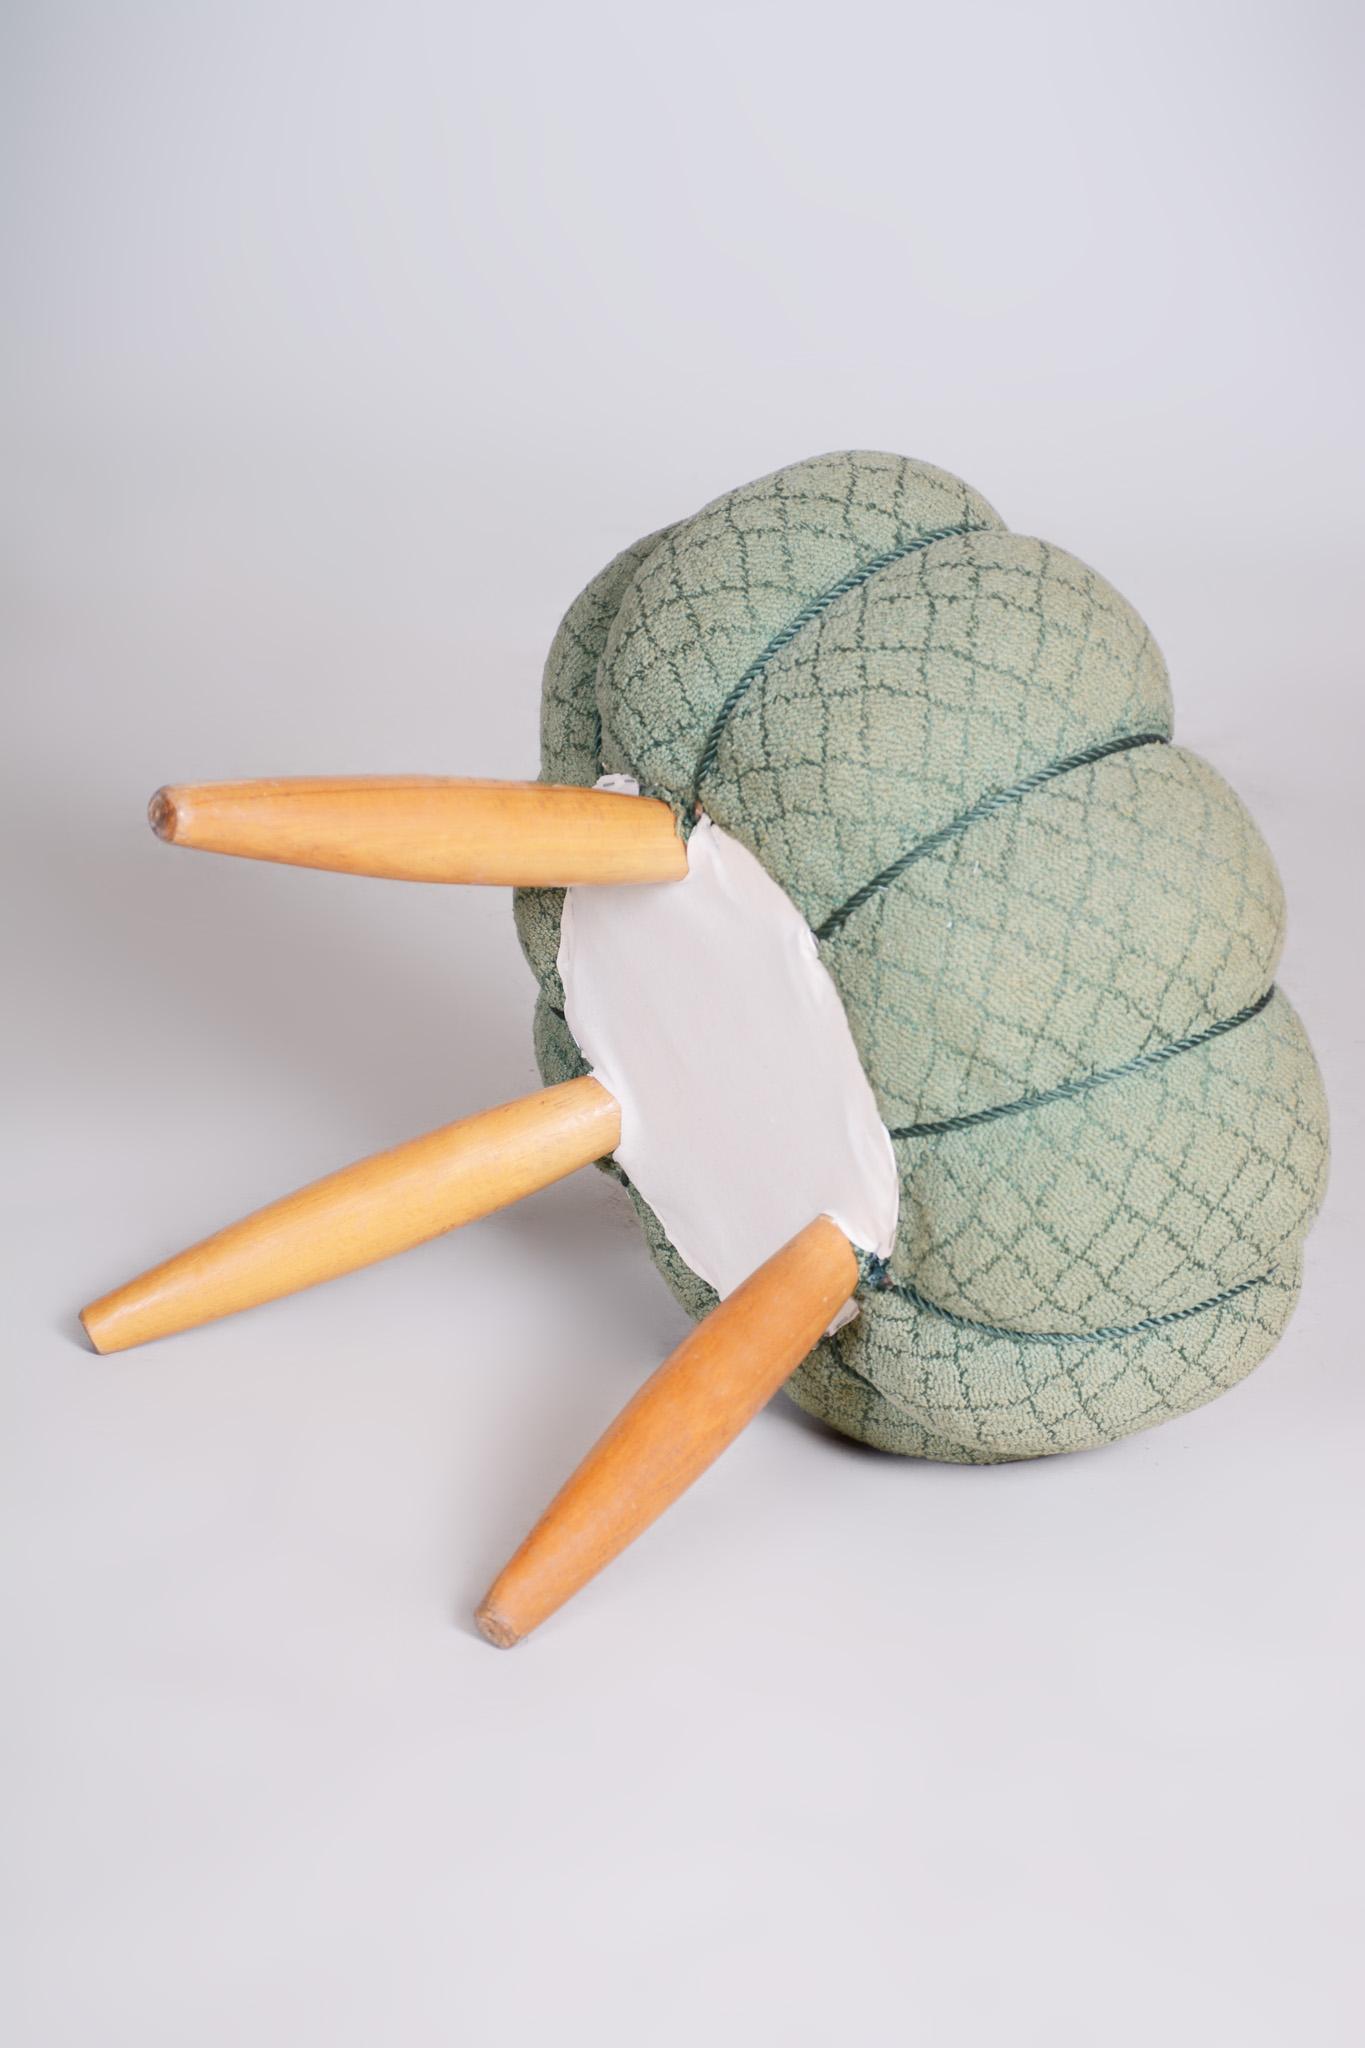 Fabric Green Midcentury Beech Stool, 1950s, Original Preserved Condition For Sale